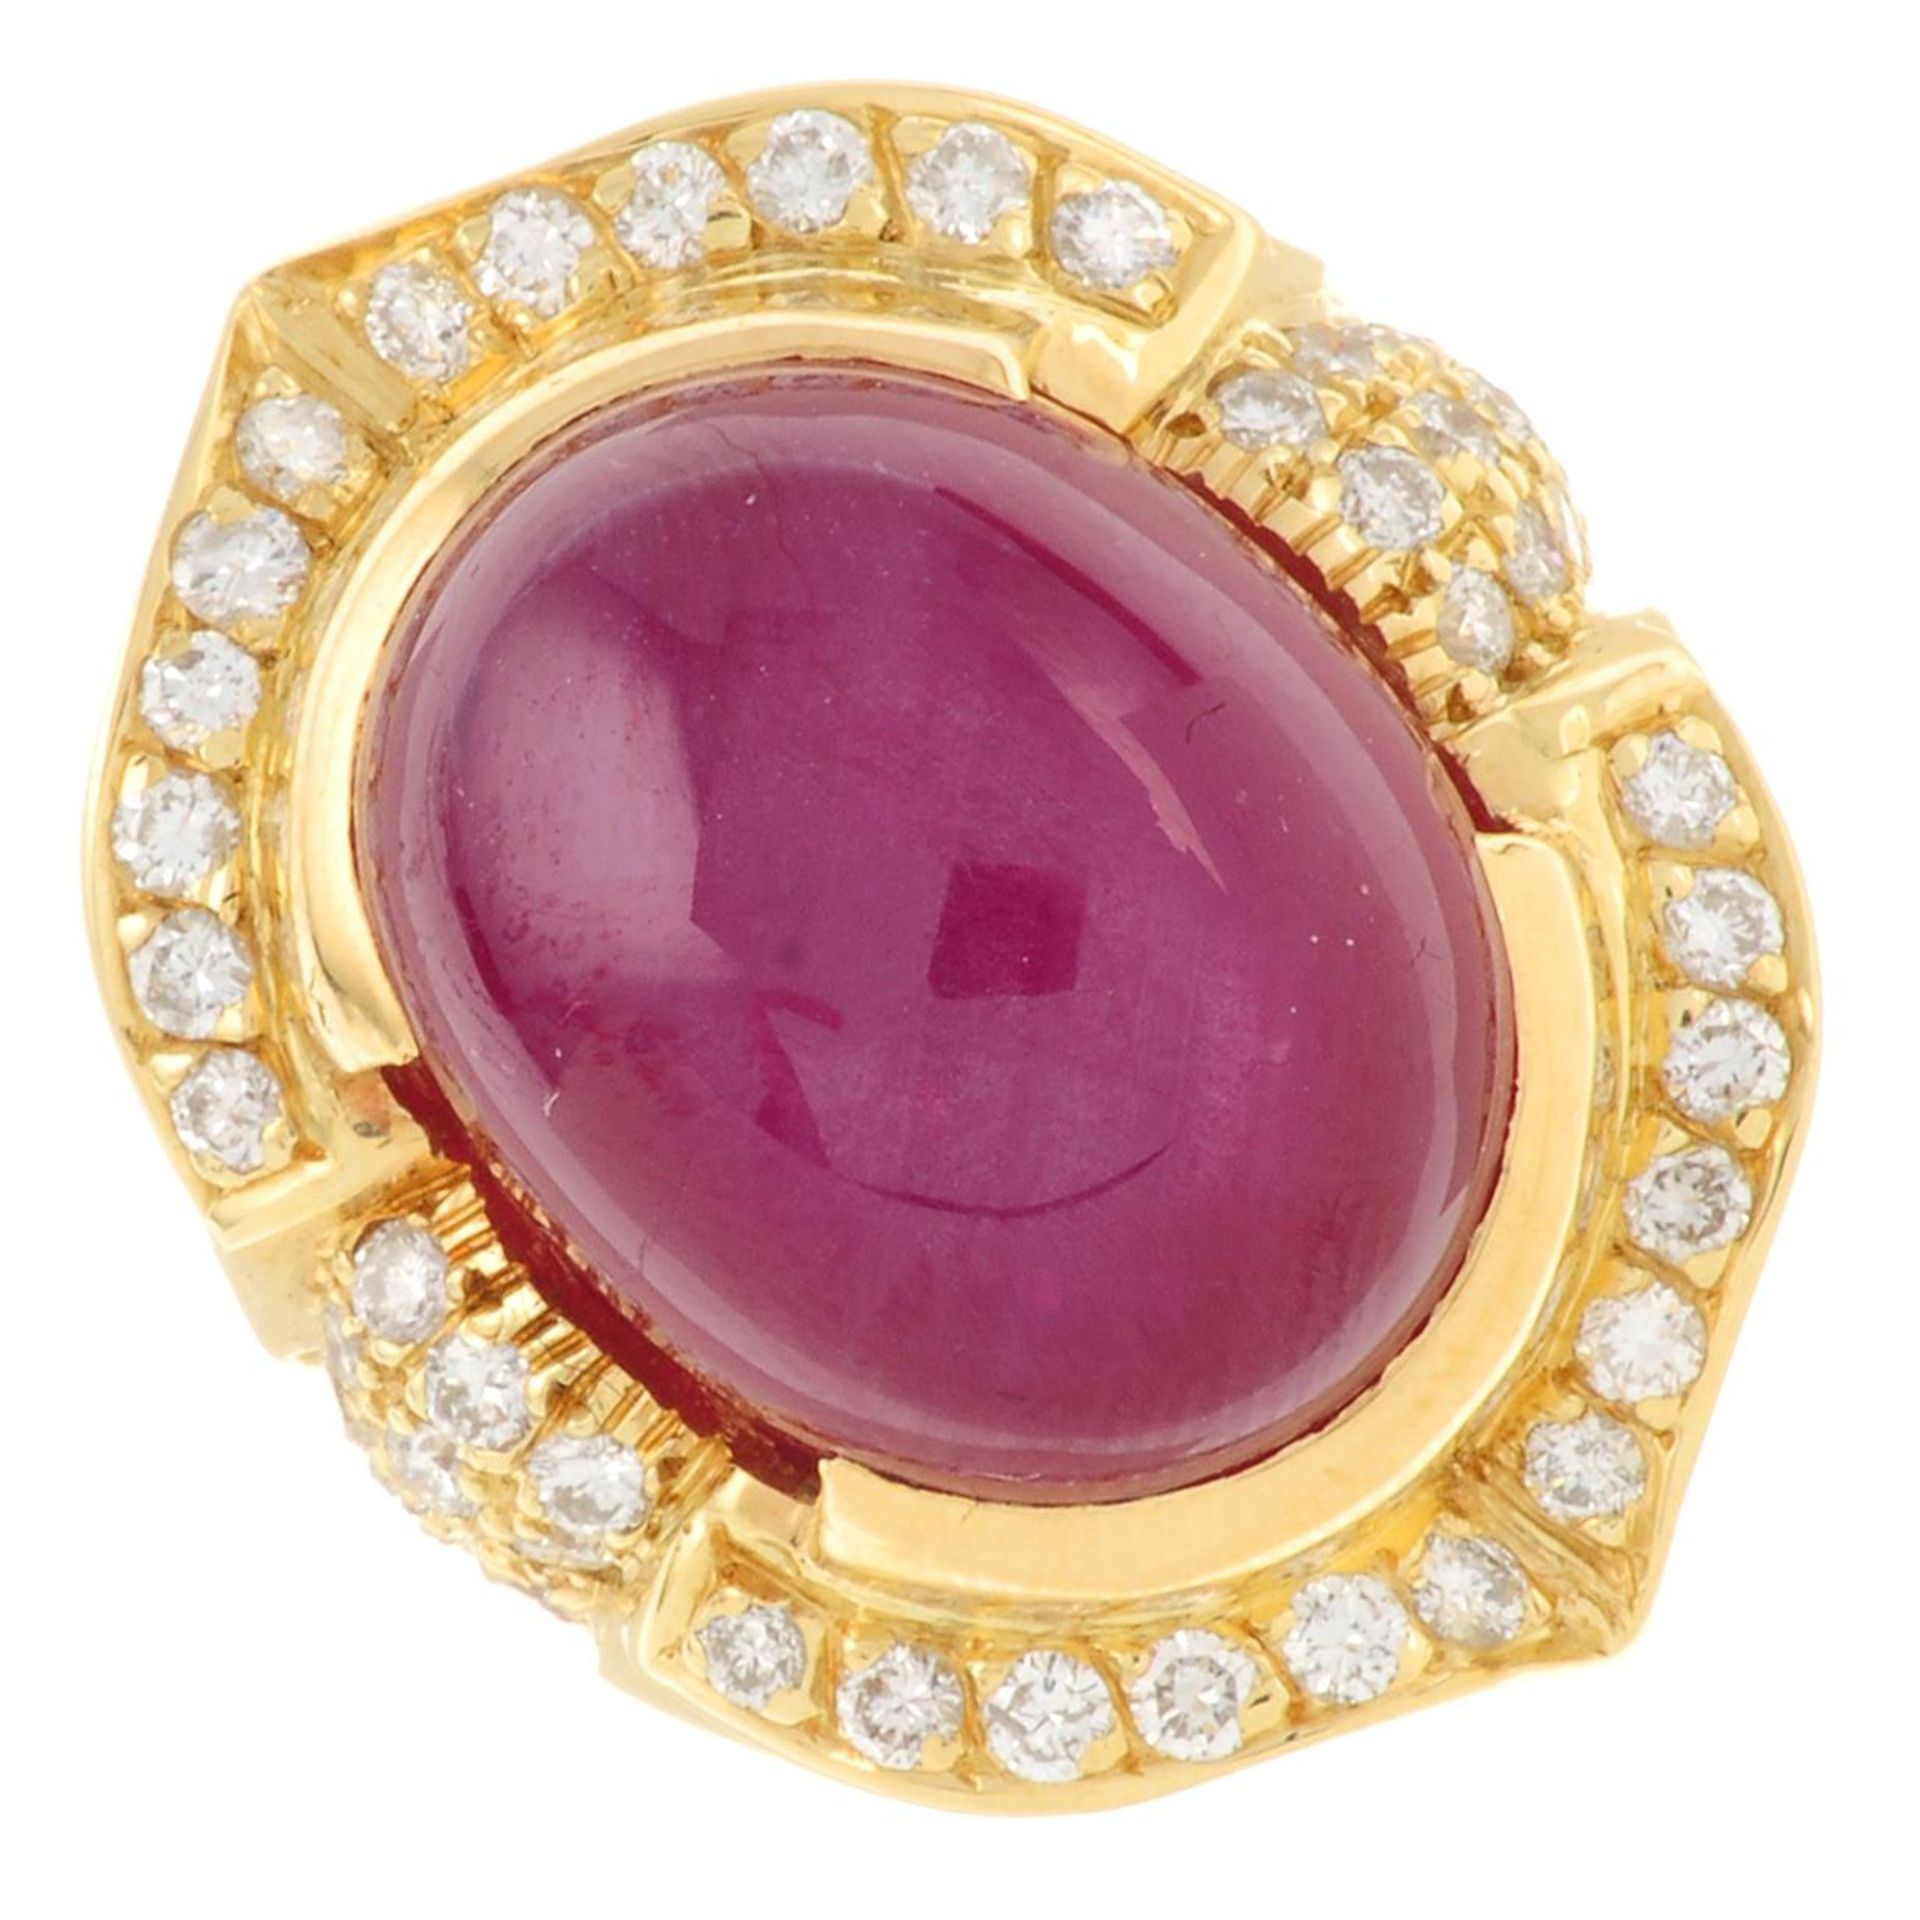 A star ruby cabochon and brilliant-cut diamond cluster ring.Estimated dimensions of ruby 18.1 by